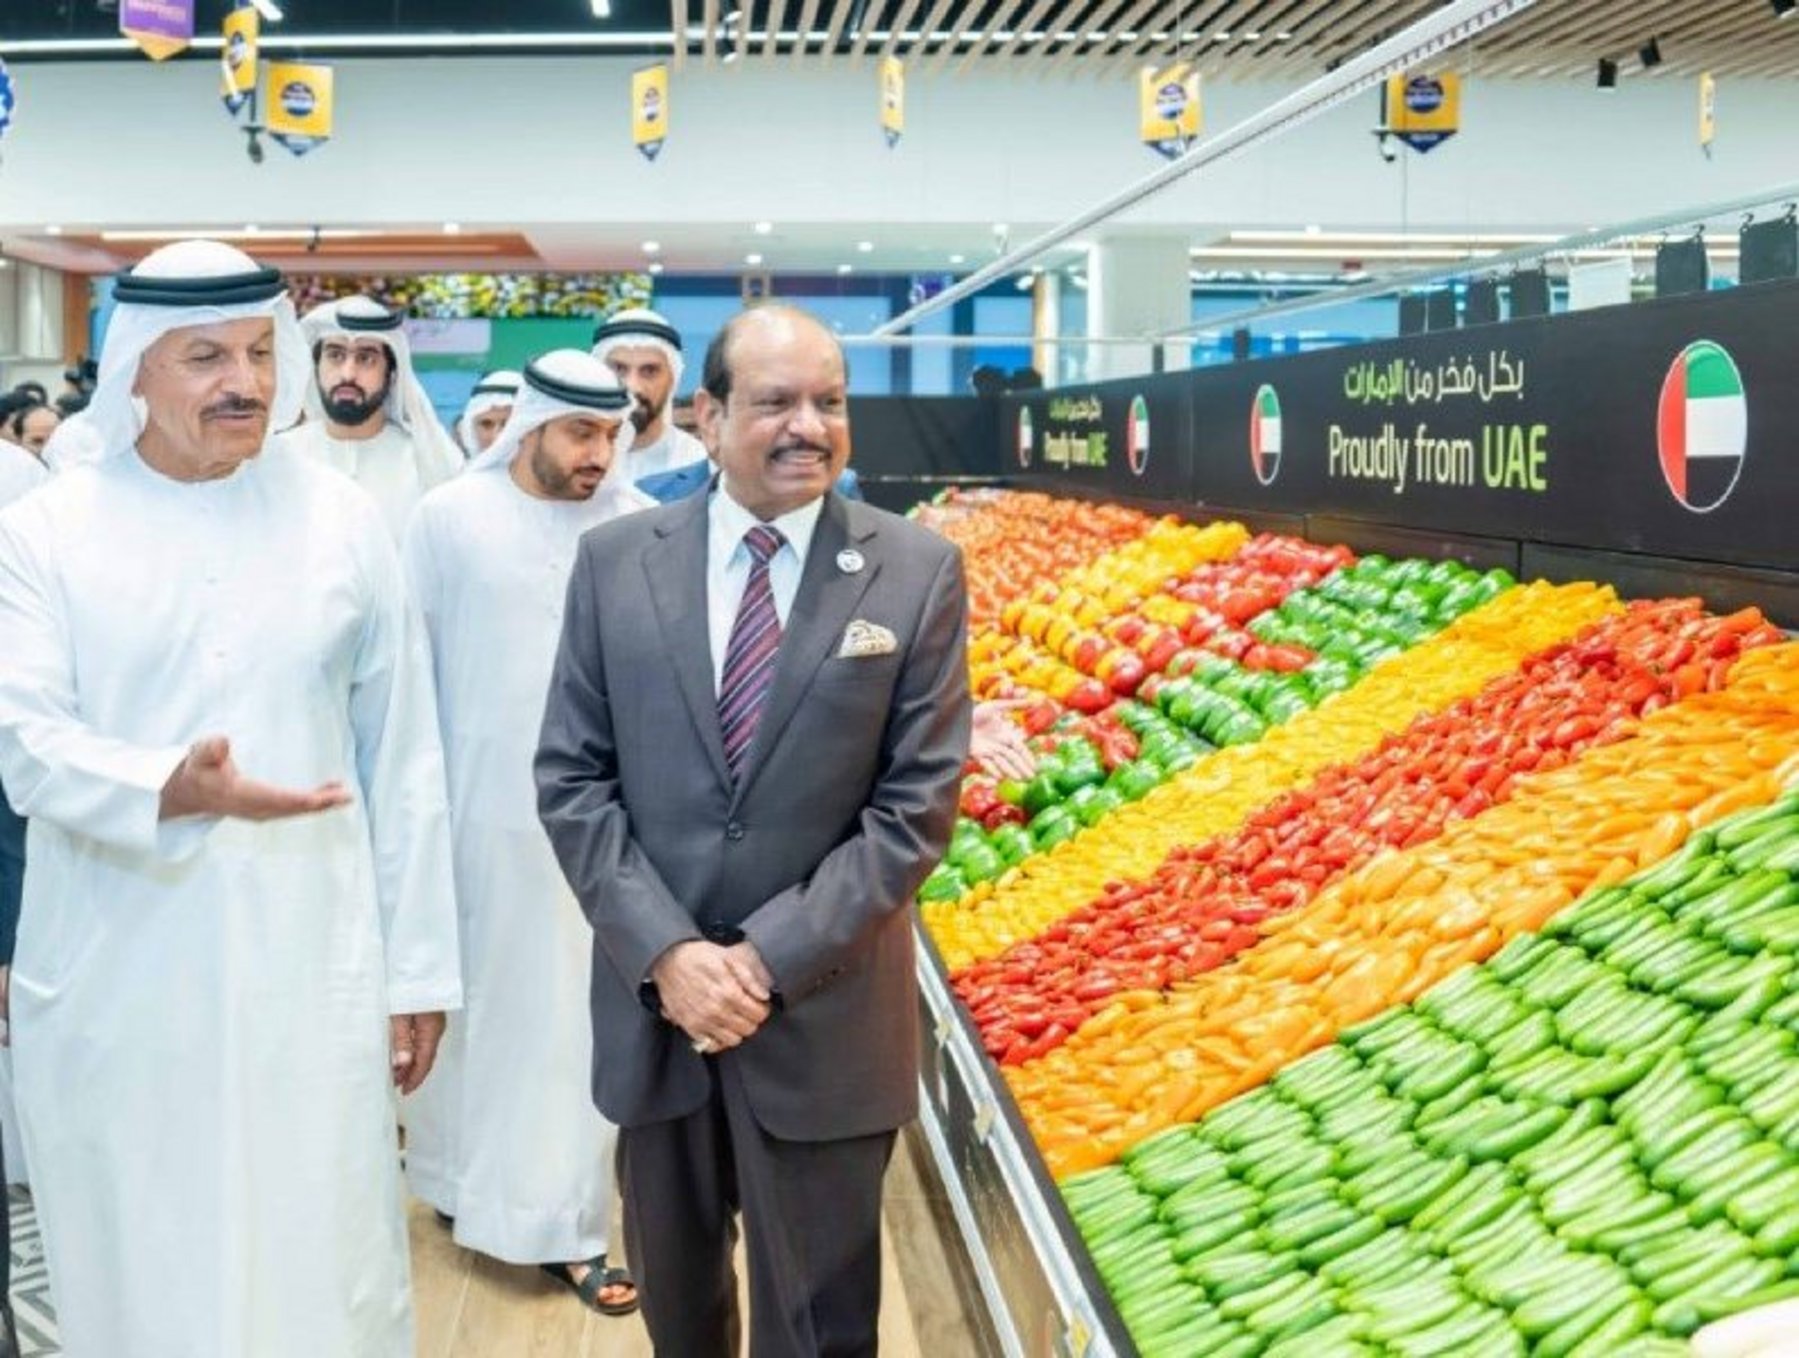 UAE Lulu Group shifts business for global growth and IPO | Business Chief  UK & Europe